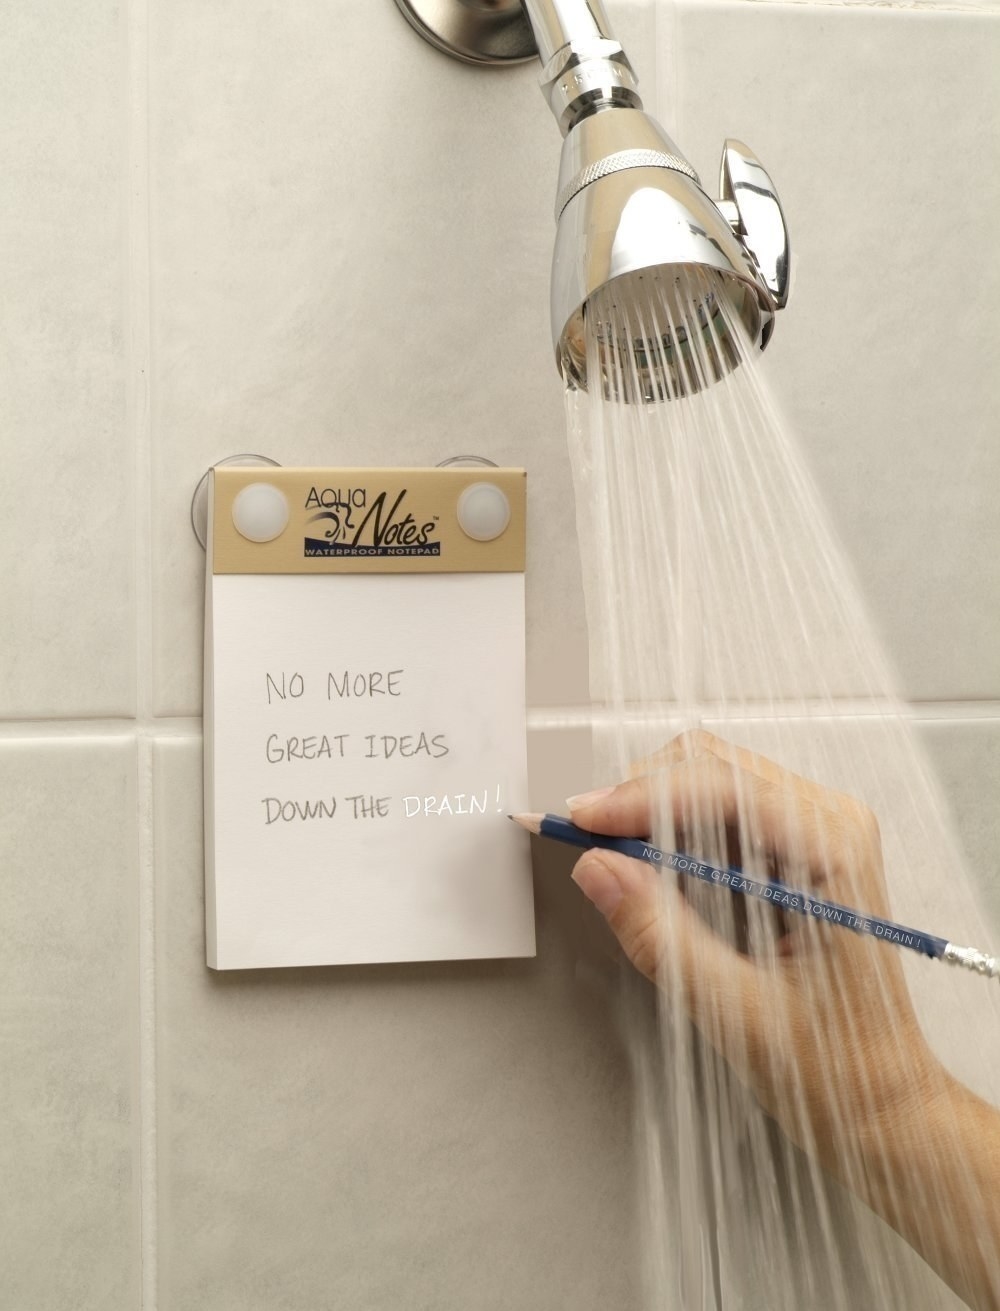 model jotting down a note while in the shower